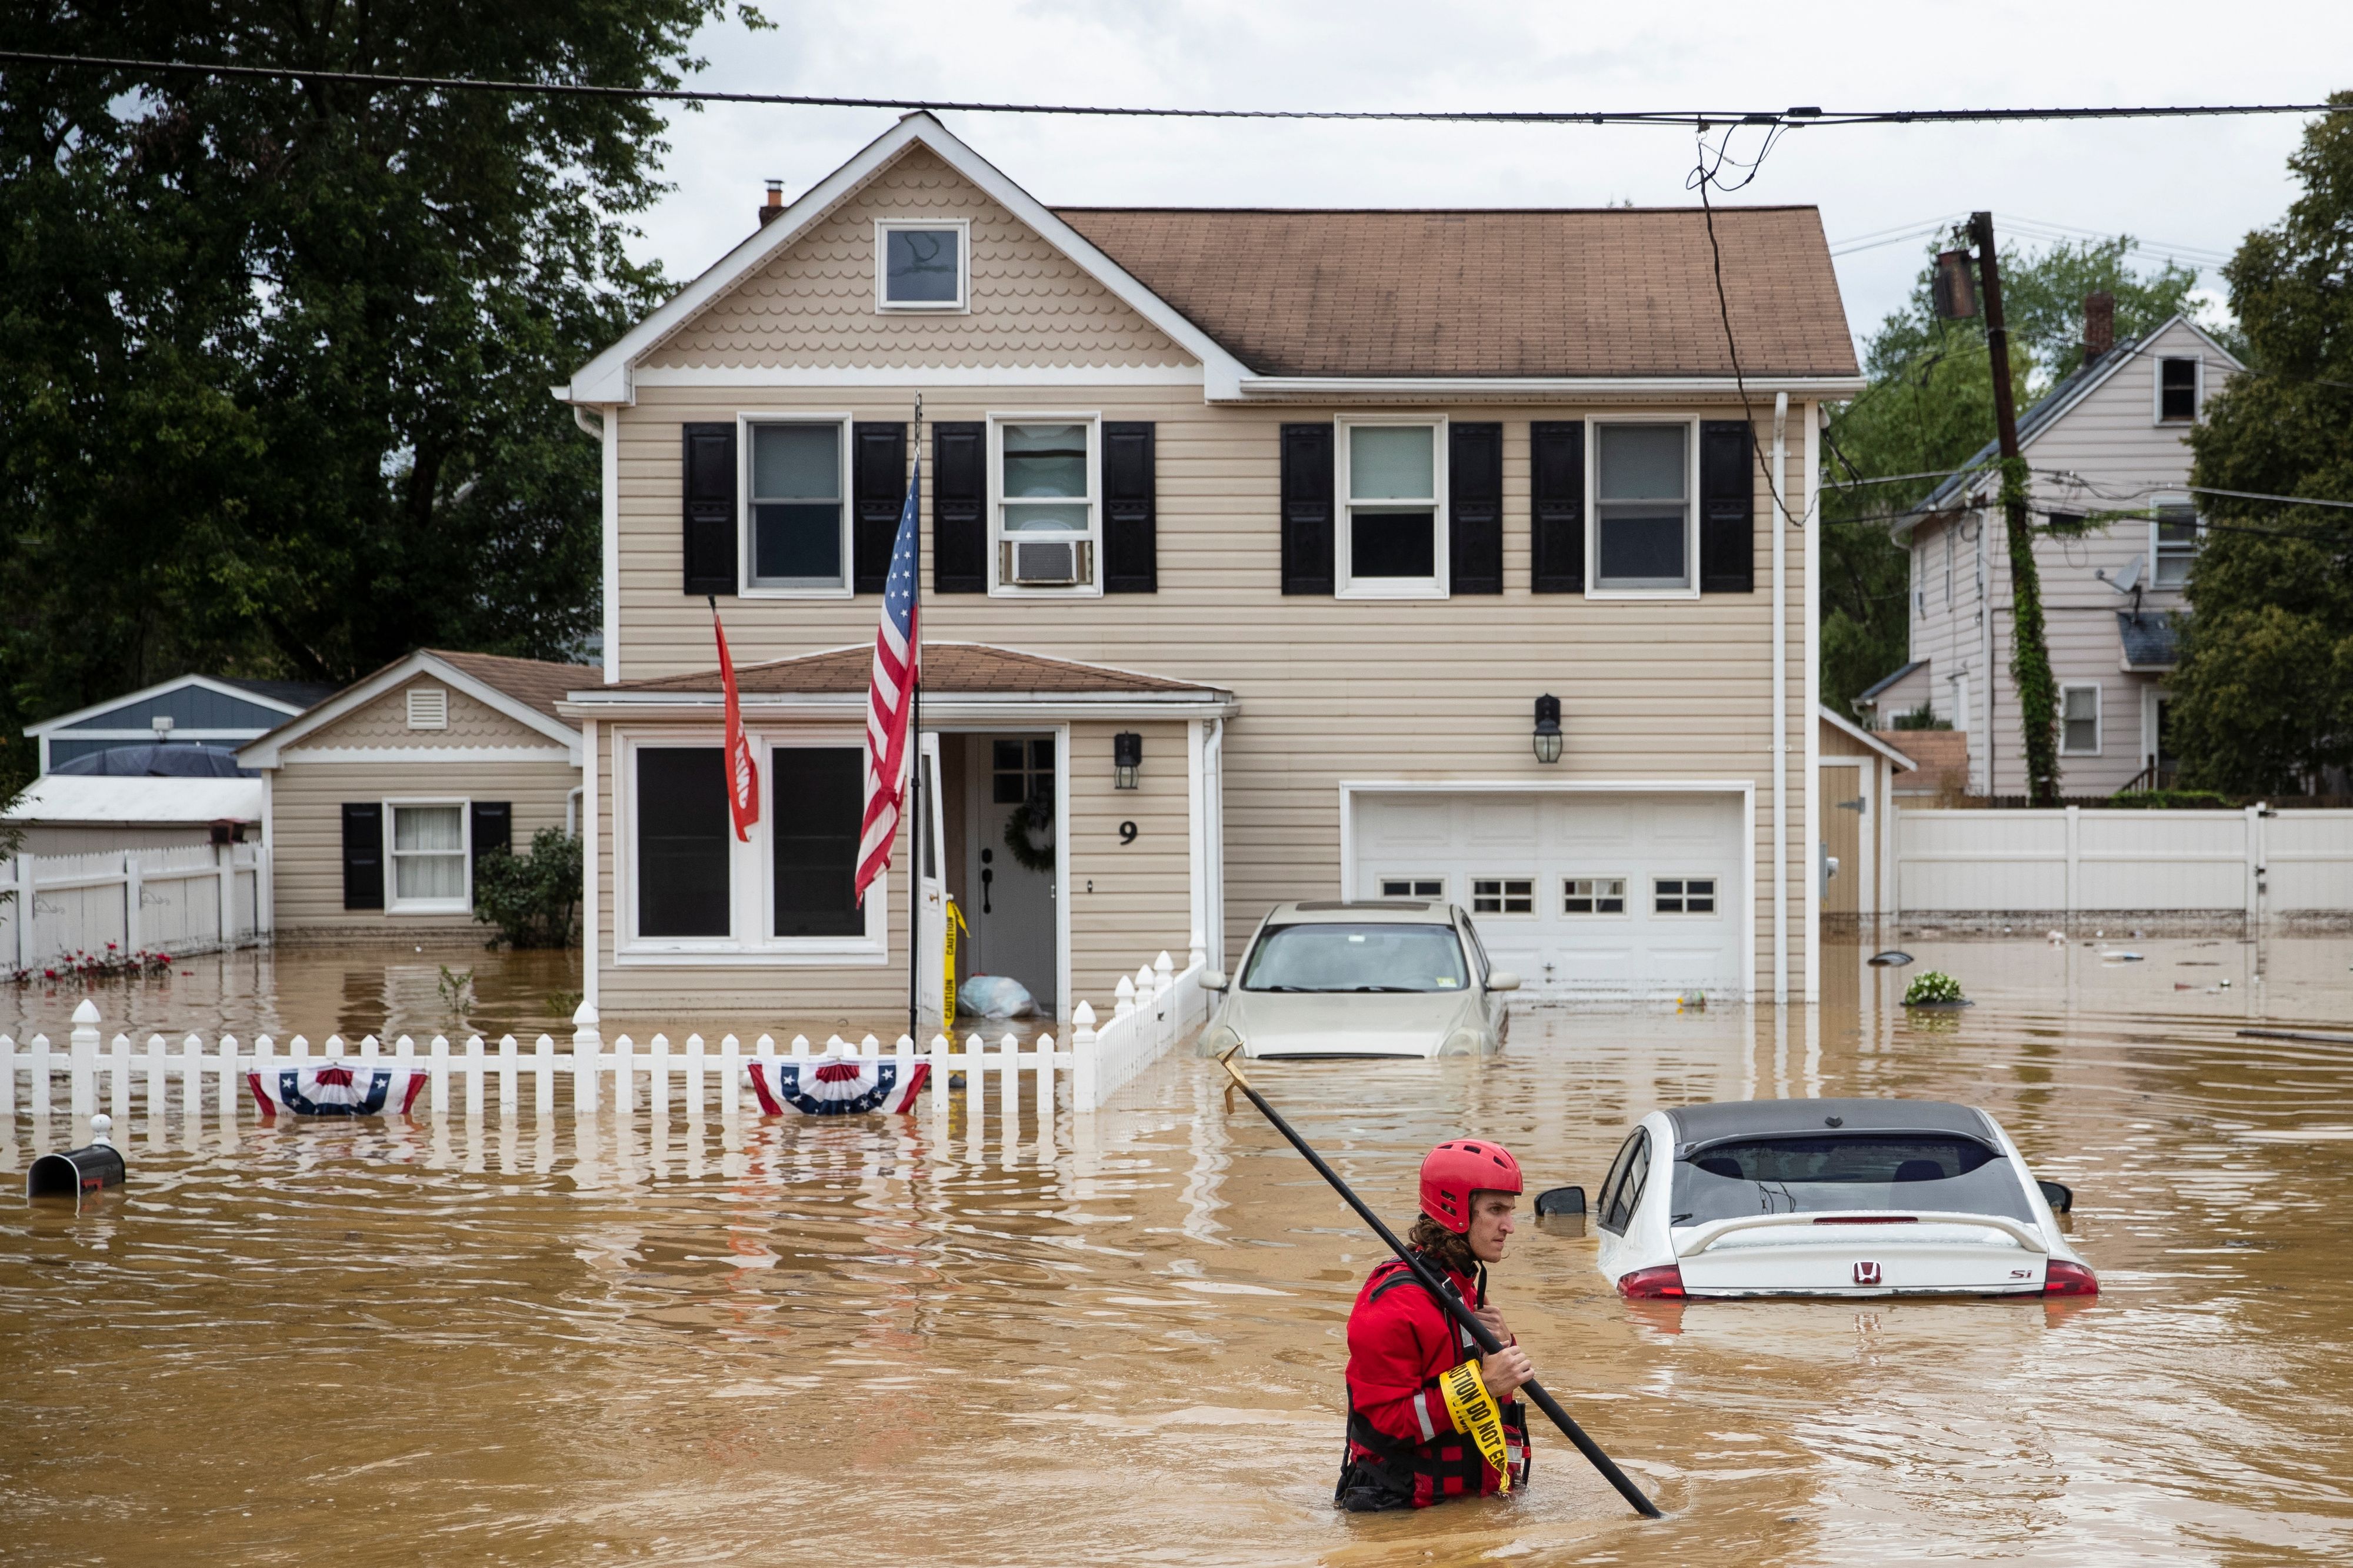 A New Market Volunteer Fire Company rescue crew member wades through high waters following a flash flood, as Tropical Storm Henri makes landfall, in Helmetta, New Jersey, on 22 August 2021